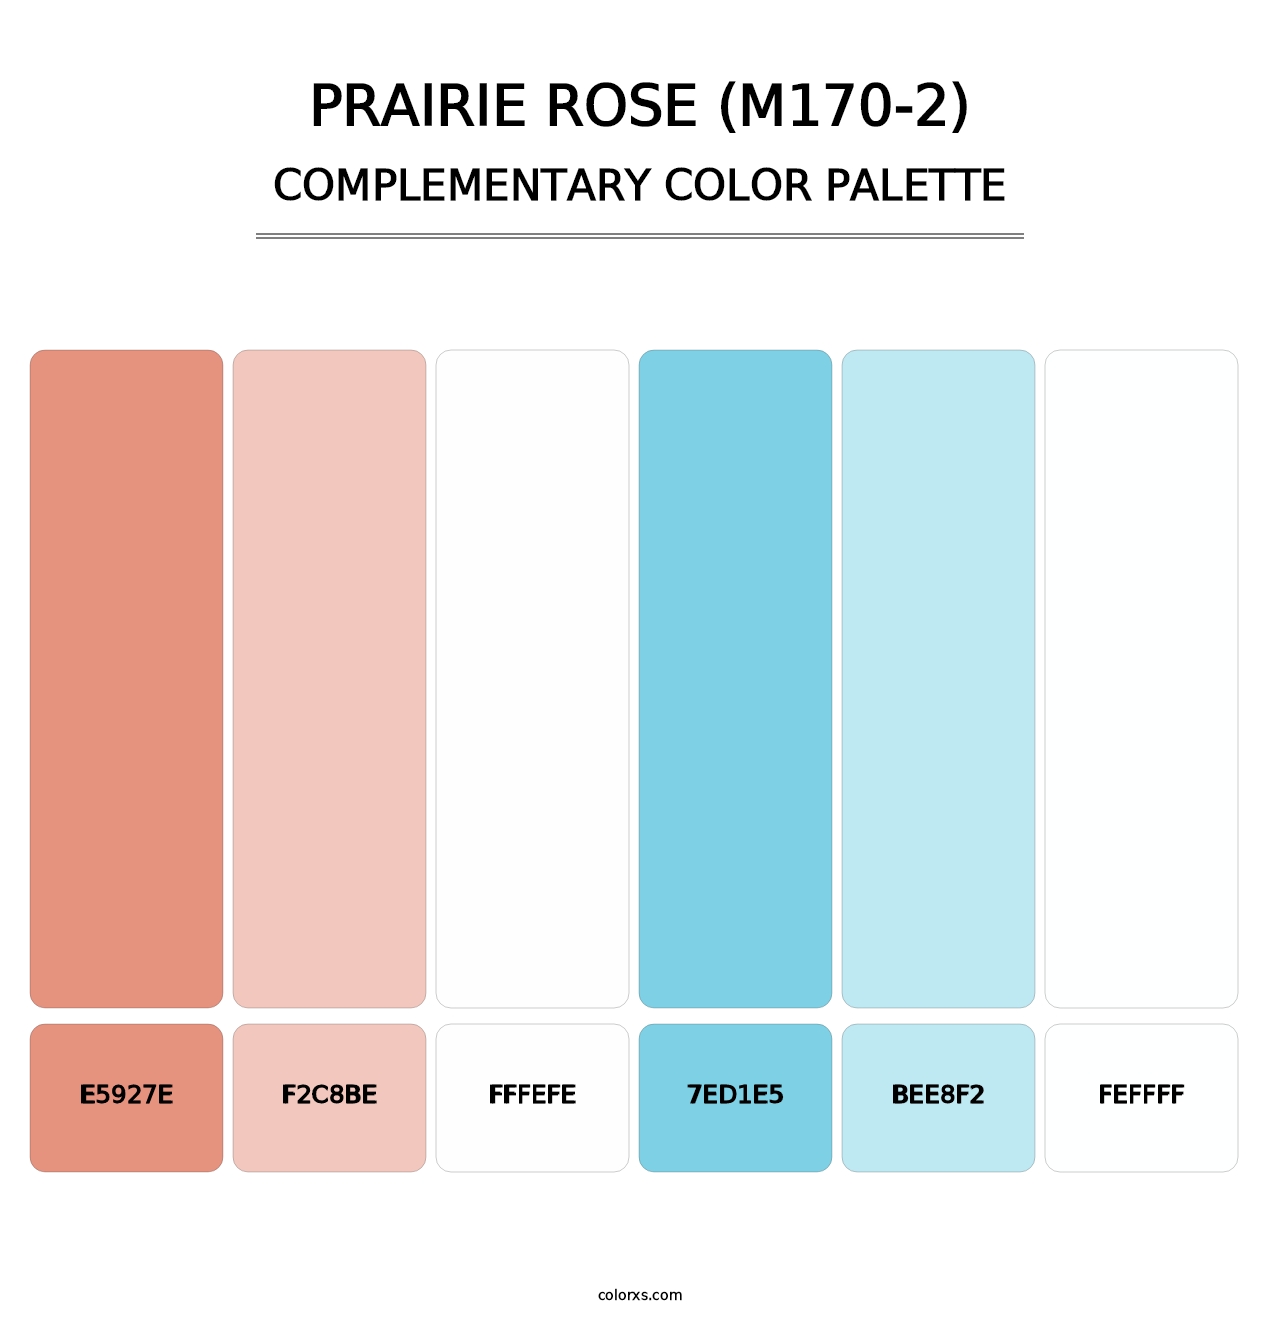 Prairie Rose (M170-2) - Complementary Color Palette